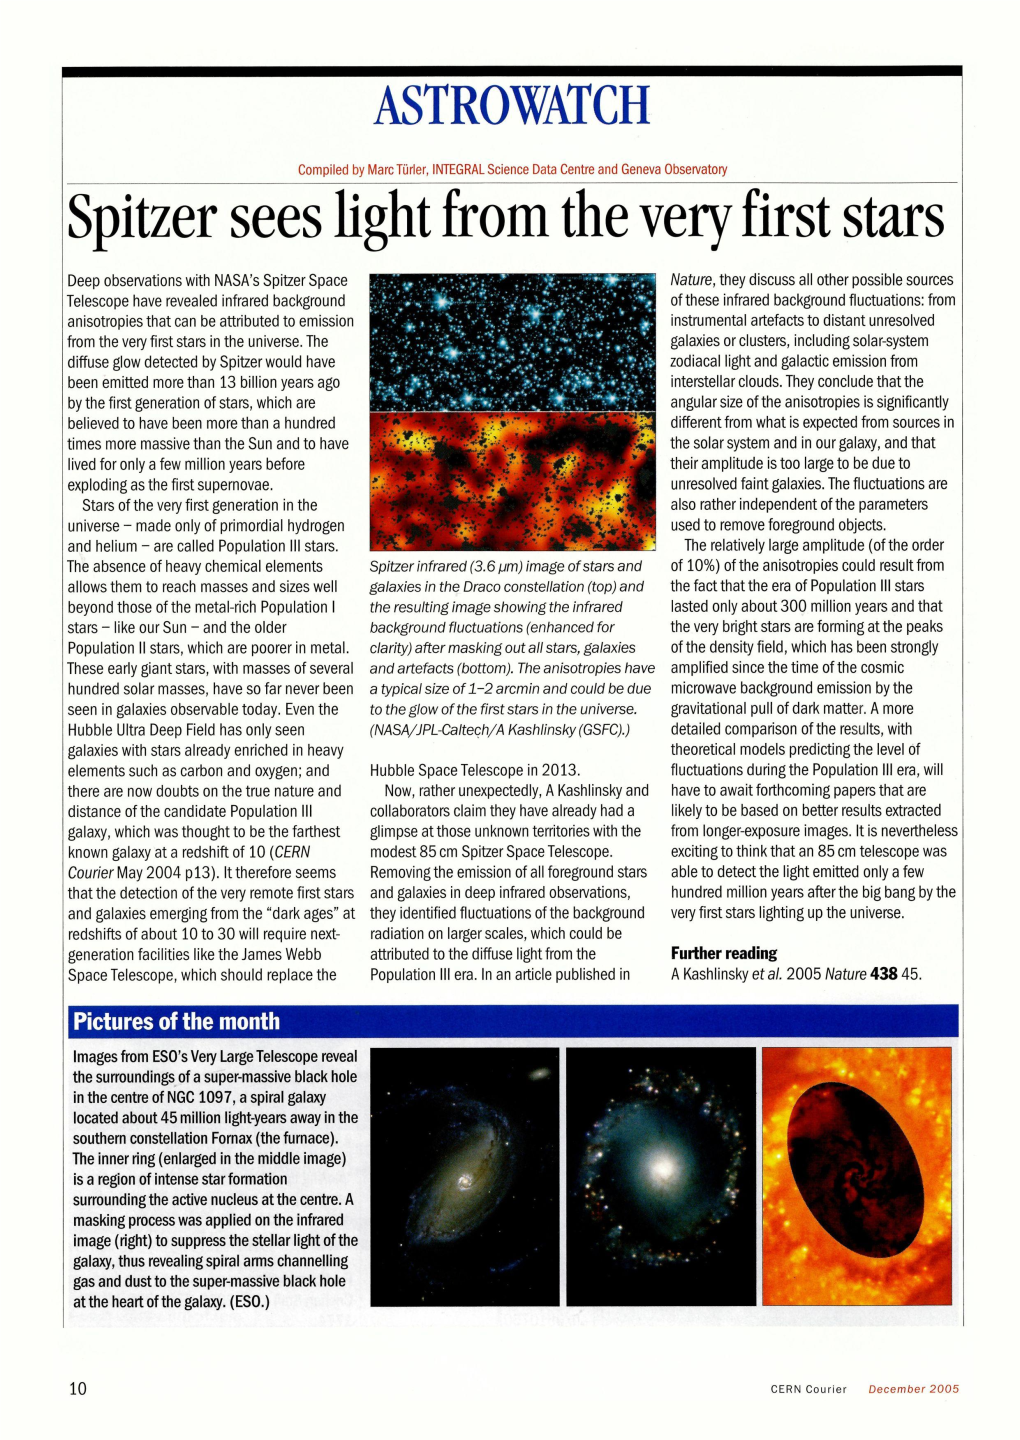 ASTROWATCH Spitzer Sees Light from the Very First Stars